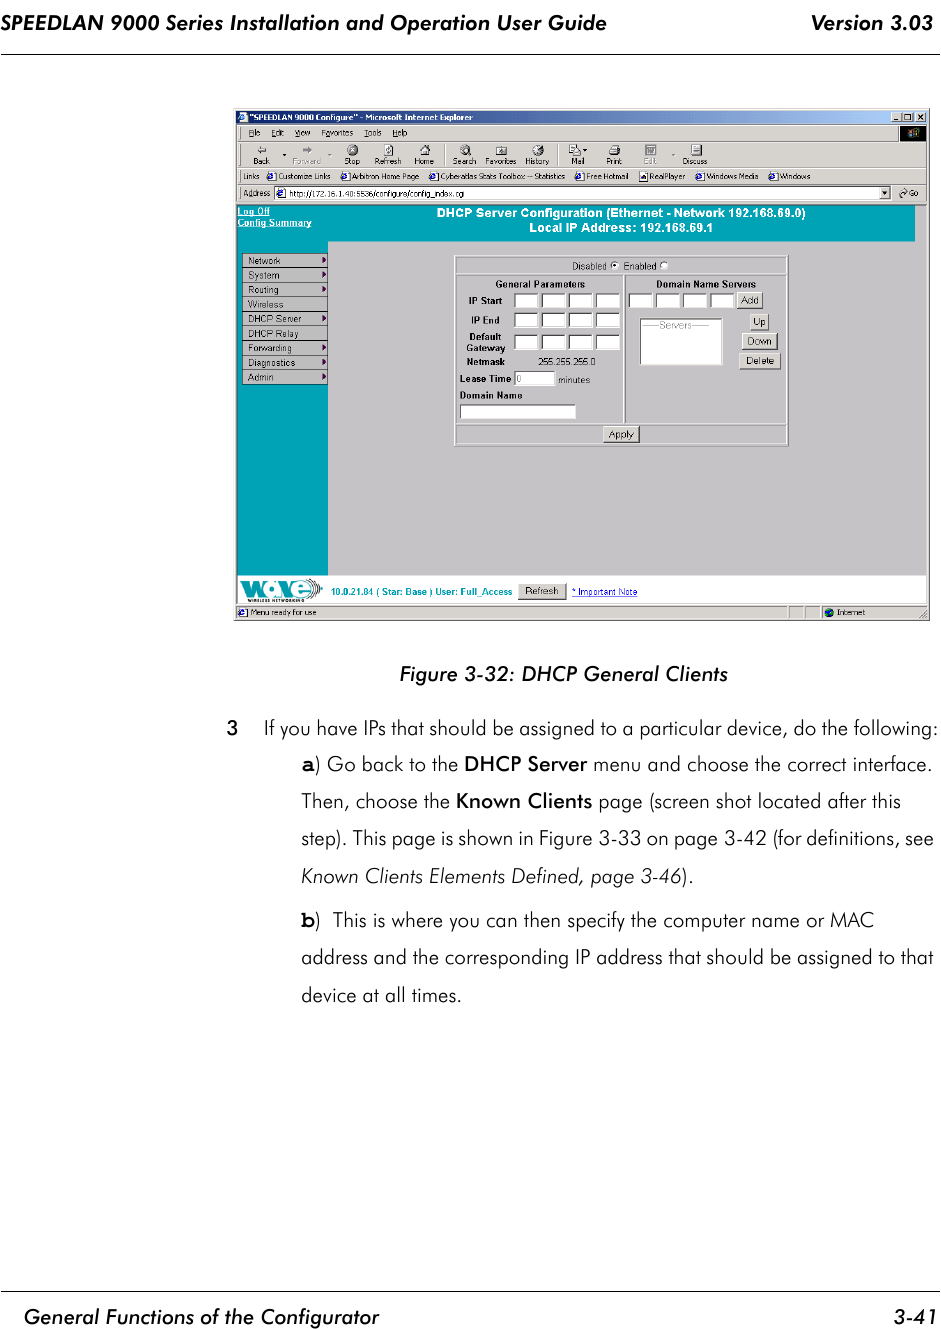 SPEEDLAN 9000 Series Installation and Operation User Guide                                 Version 3.03     General Functions of the Configurator 3-41                                                                                                                                                              Figure 3-32: DHCP General Clients3If you have IPs that should be assigned to a particular device, do the following:a) Go back to the DHCP Server menu and choose the correct interface. Then, choose the Known Clients page (screen shot located after this step). This page is shown in Figure 3-33 on page 3-42 (for definitions, see Known Clients Elements Defined, page 3-46).b)  This is where you can then specify the computer name or MAC address and the corresponding IP address that should be assigned to that device at all times.  